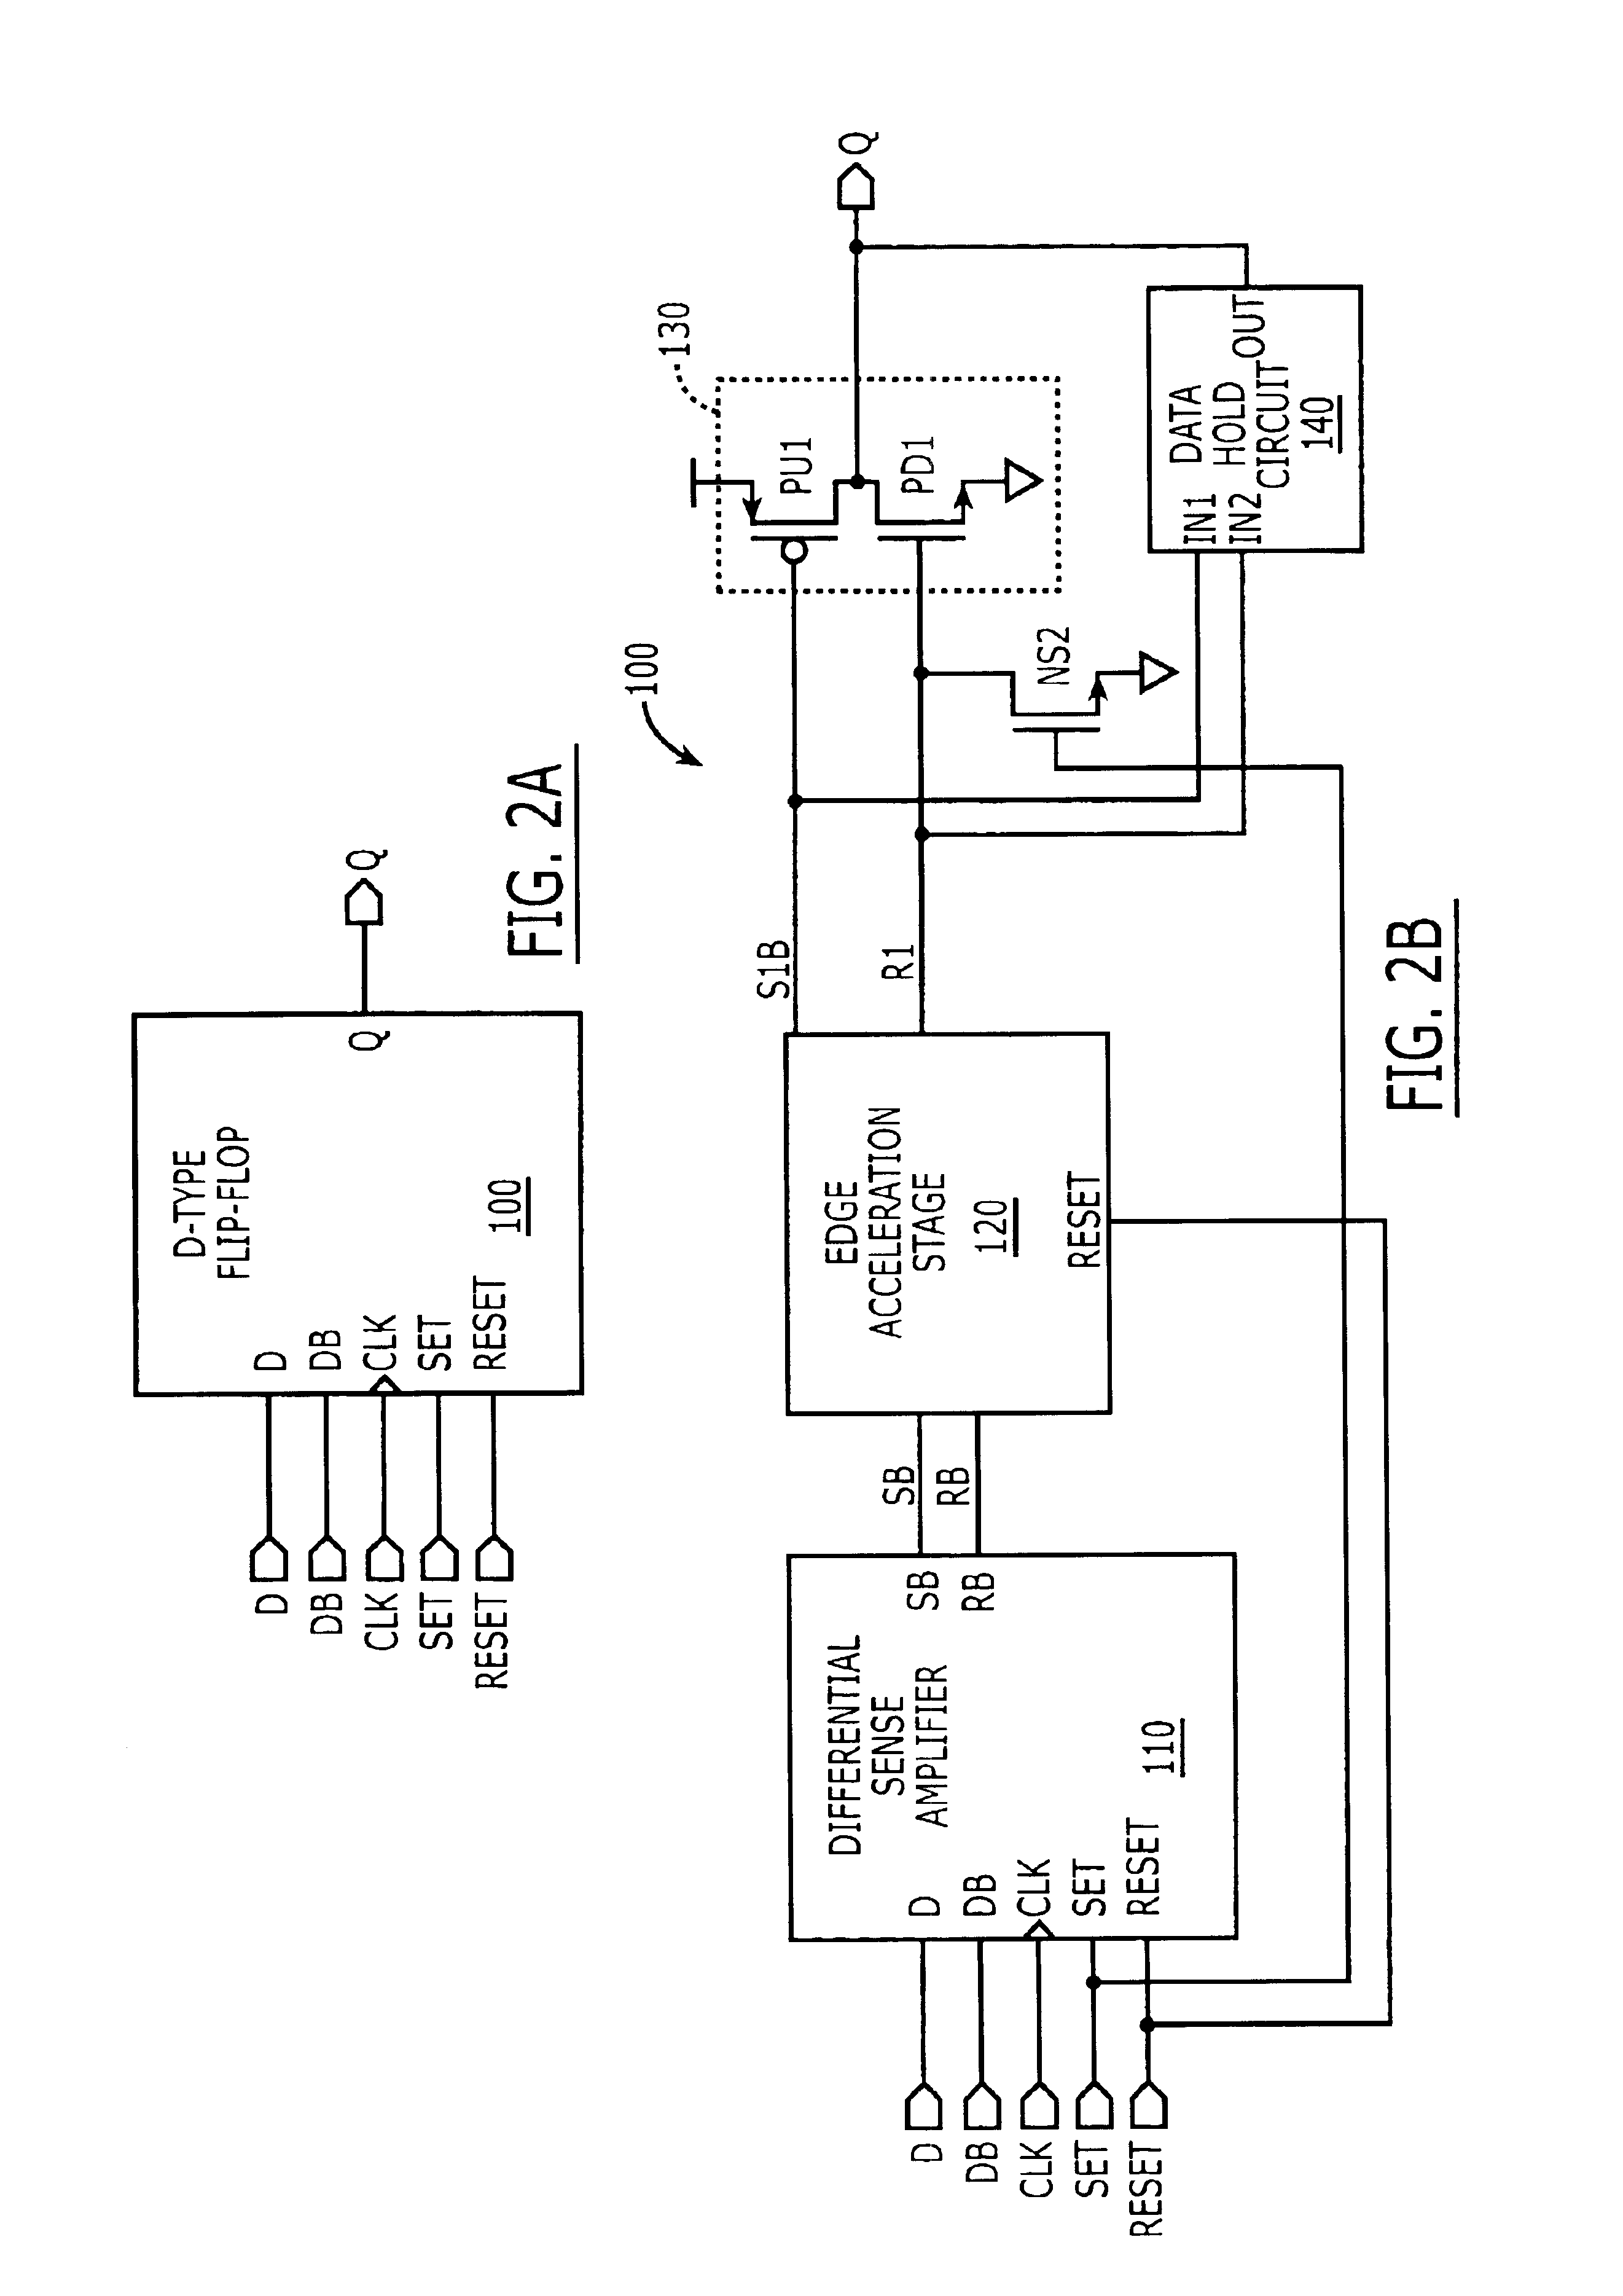 Edge accelerated sense amplifier flip-flop with high fanout drive capability